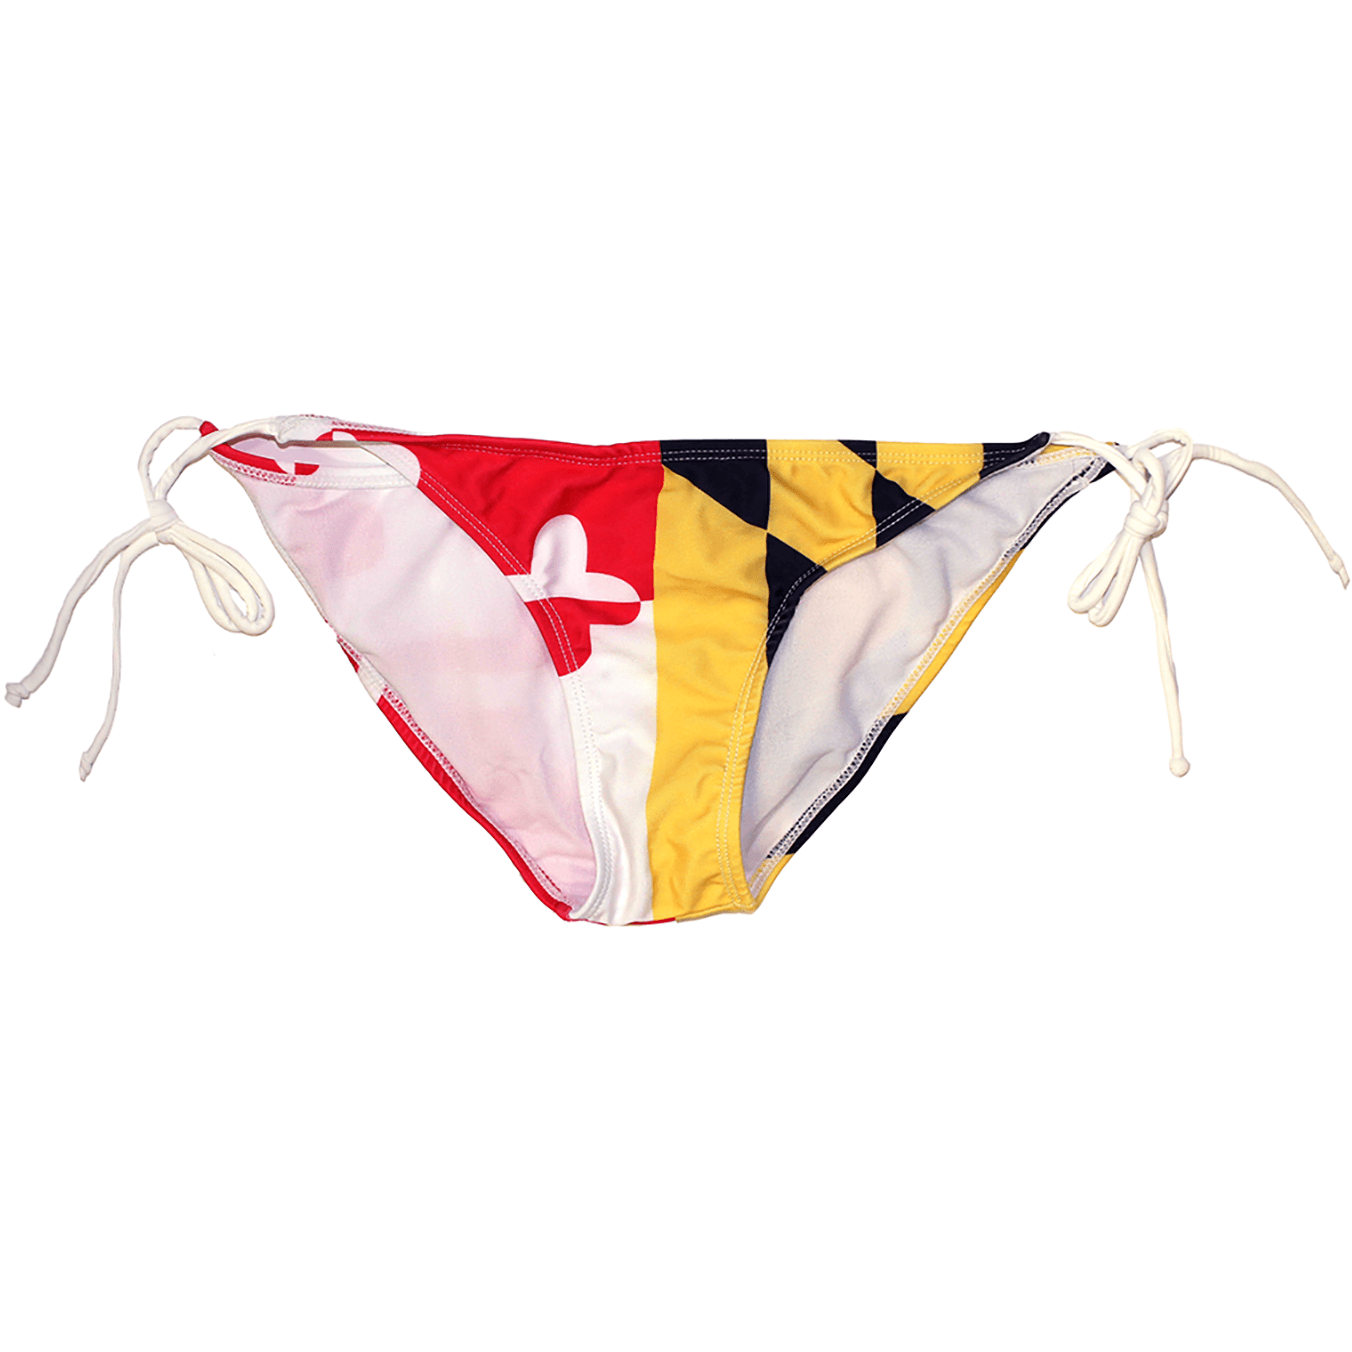 Route One Apparel - Maryland Full Flag / Sports Bra